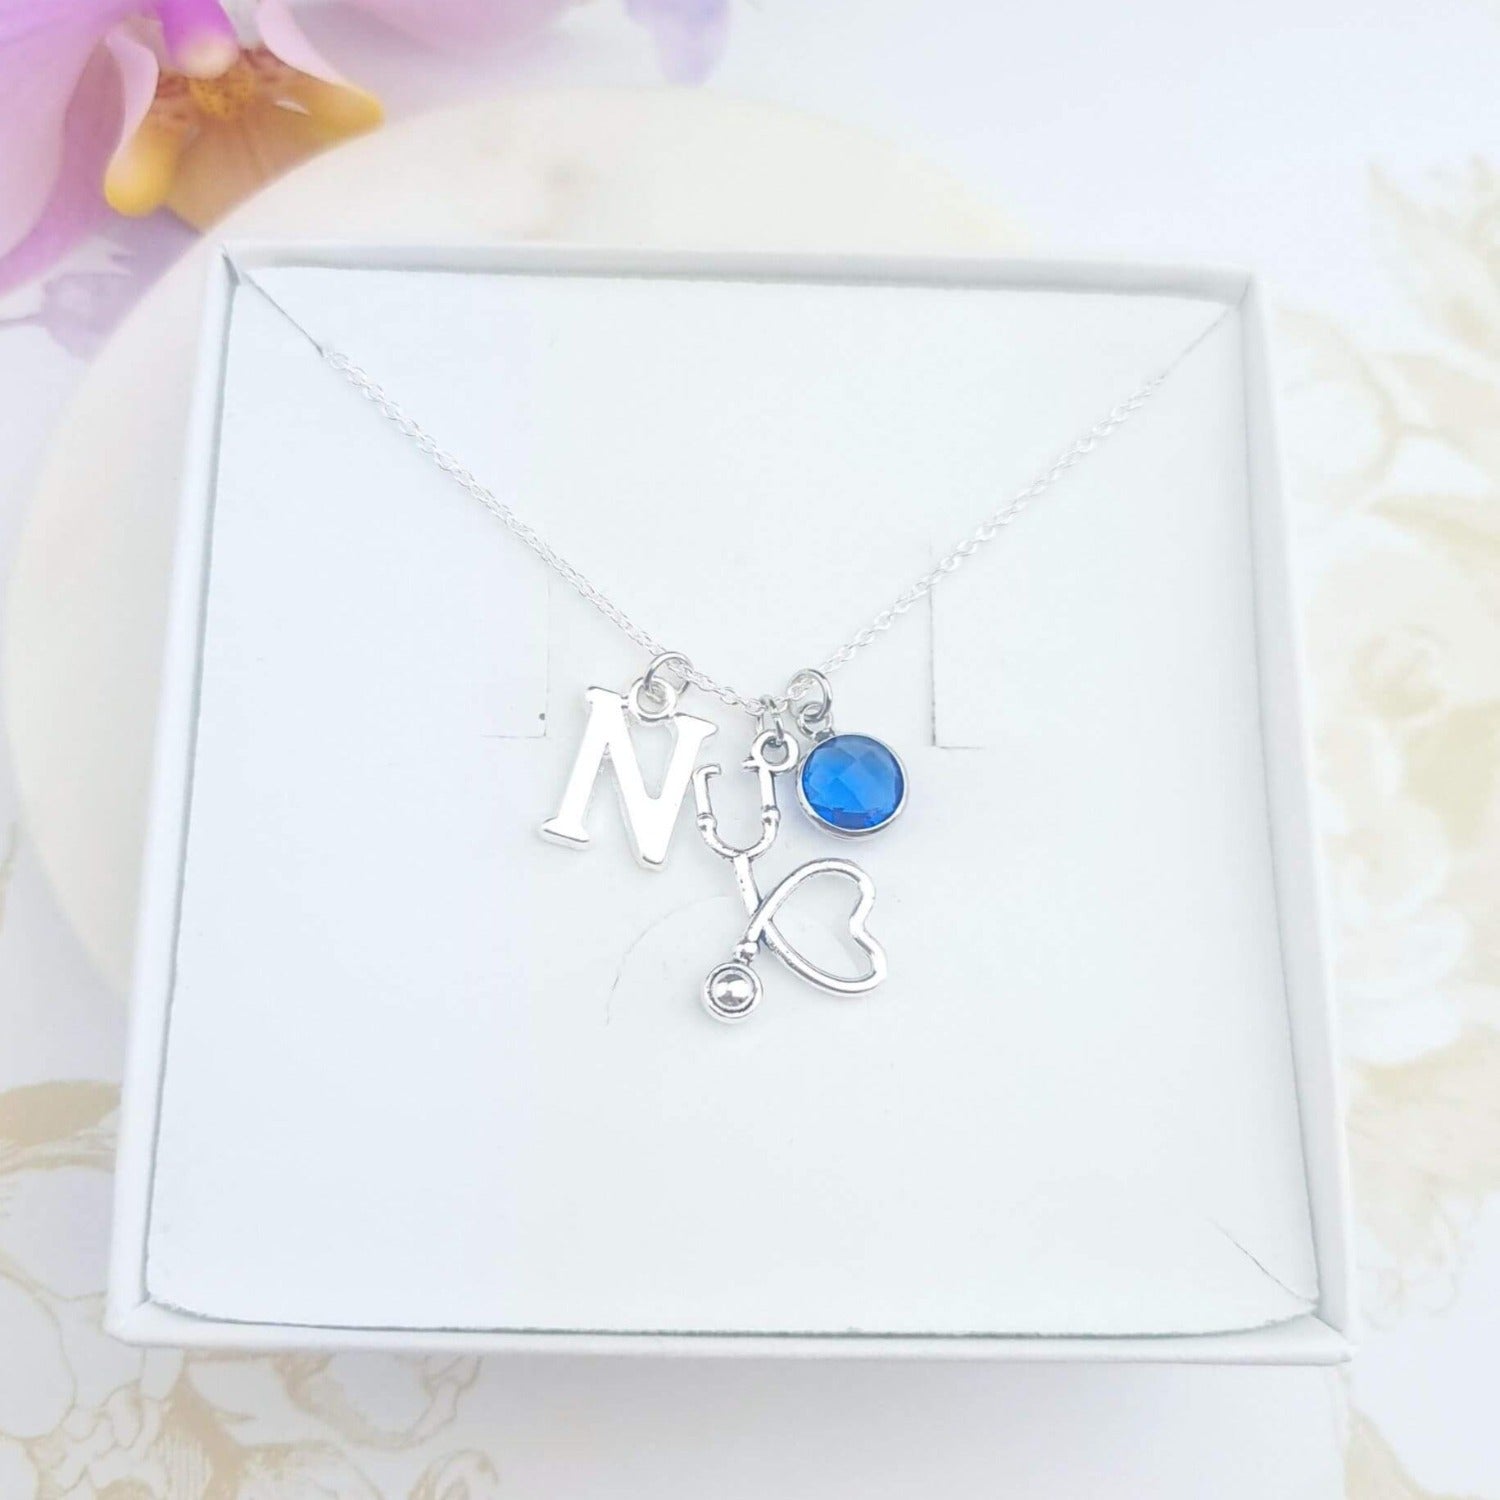 personalised stethoscope necklace in sterling silver